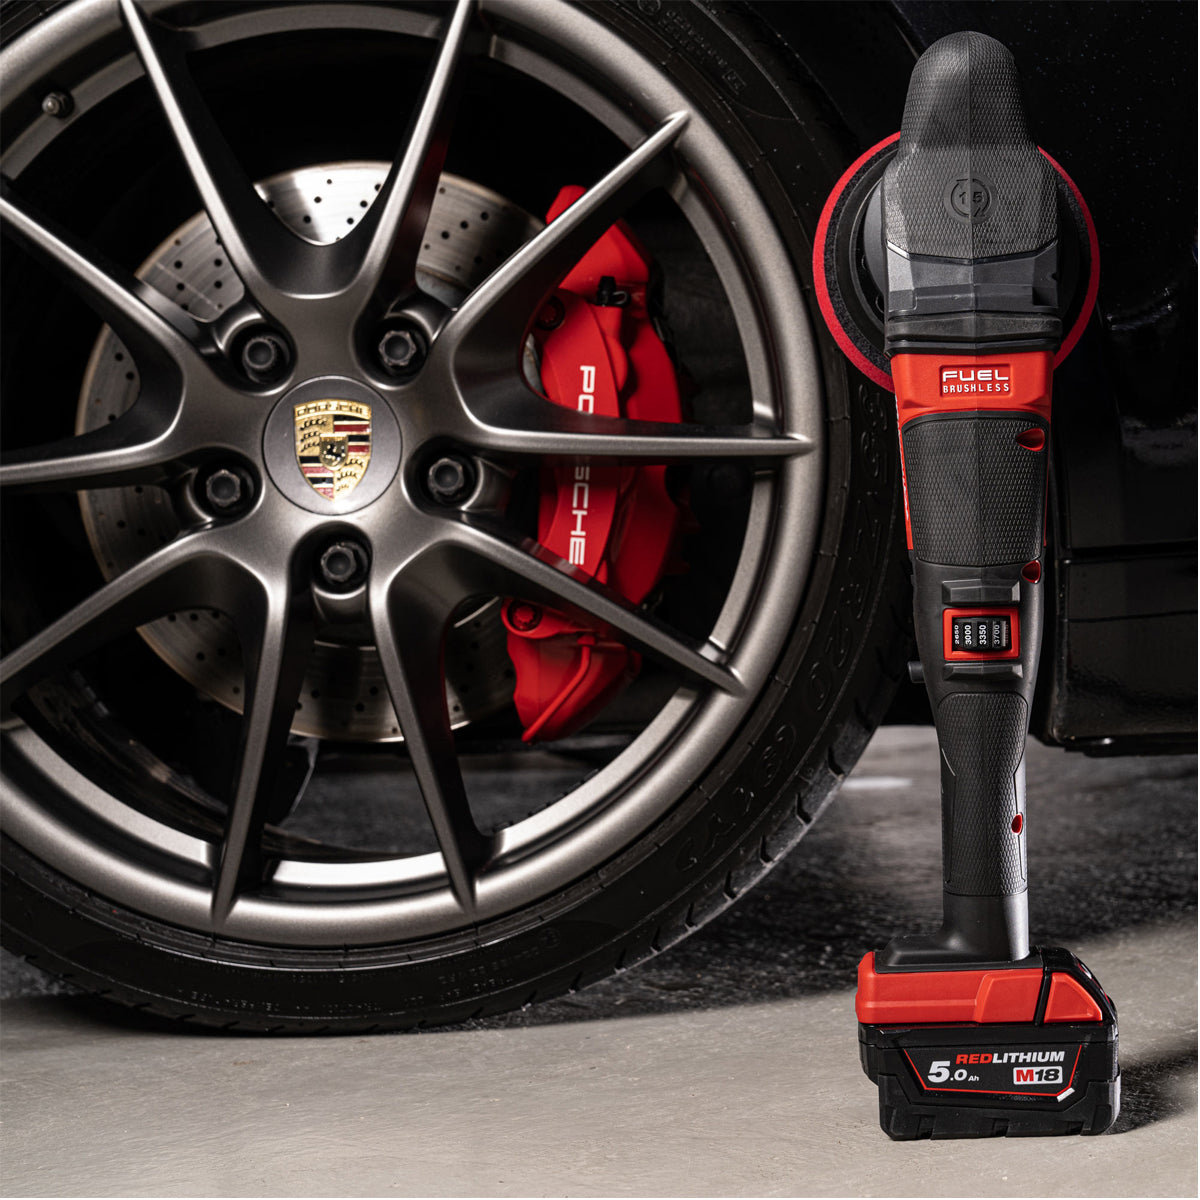 Milwaukee M18FROP15-0X 18V Brushless 125mm Random Orbital Polisher with 1 x 5.0Ah Battery & Charger